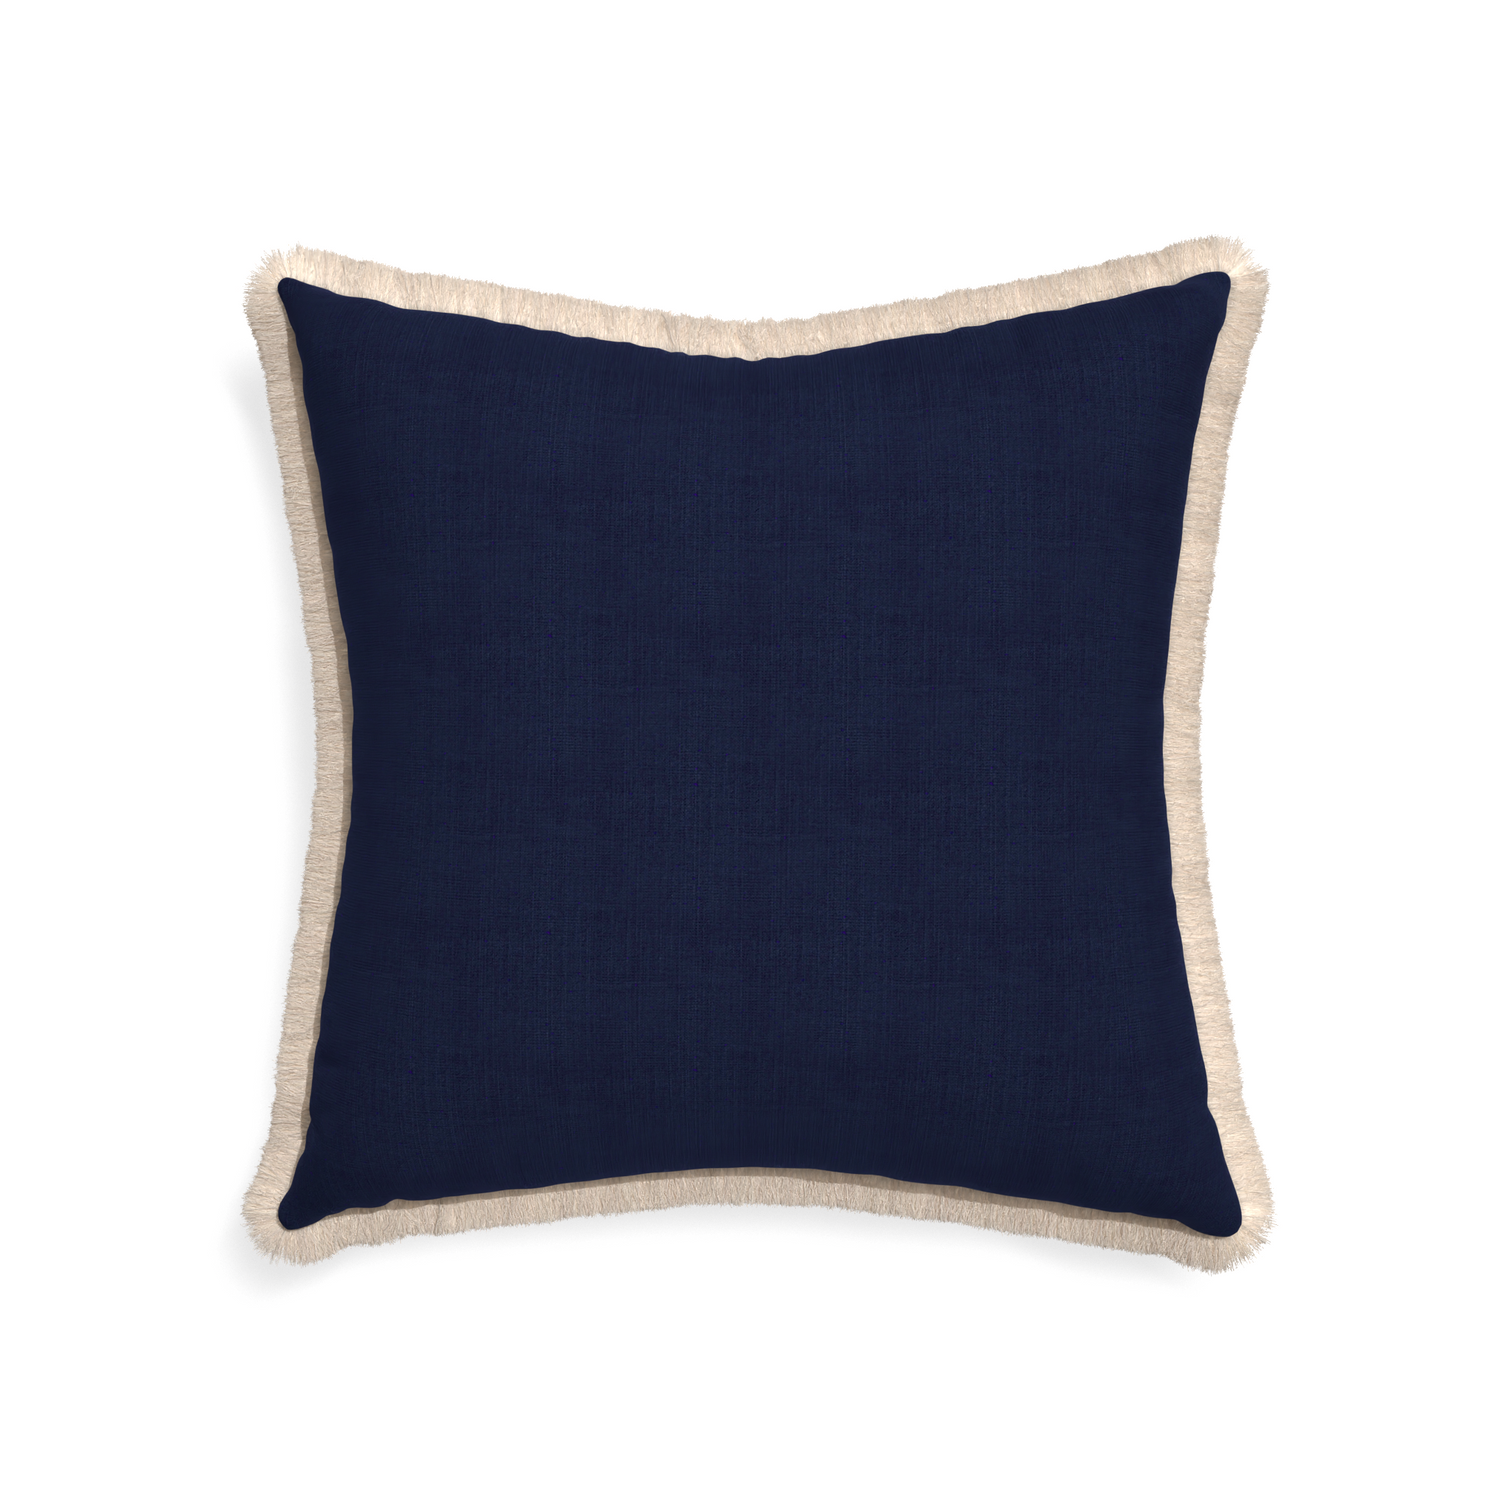 22-square midnight custom pillow with cream fringe on white background